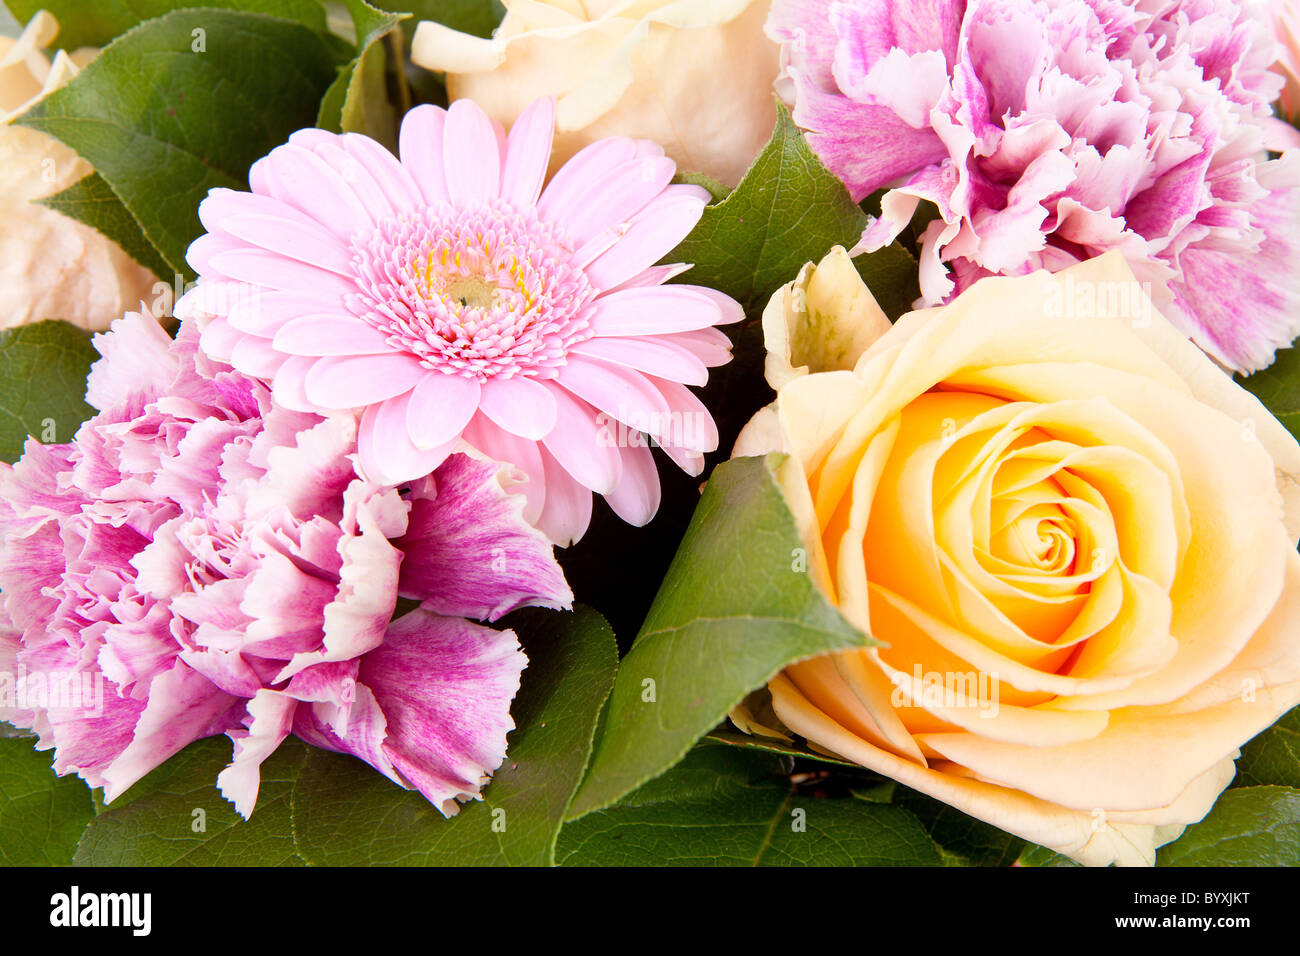 Flowers Bouquet High Resolution Stock Photography and Images - Alamy